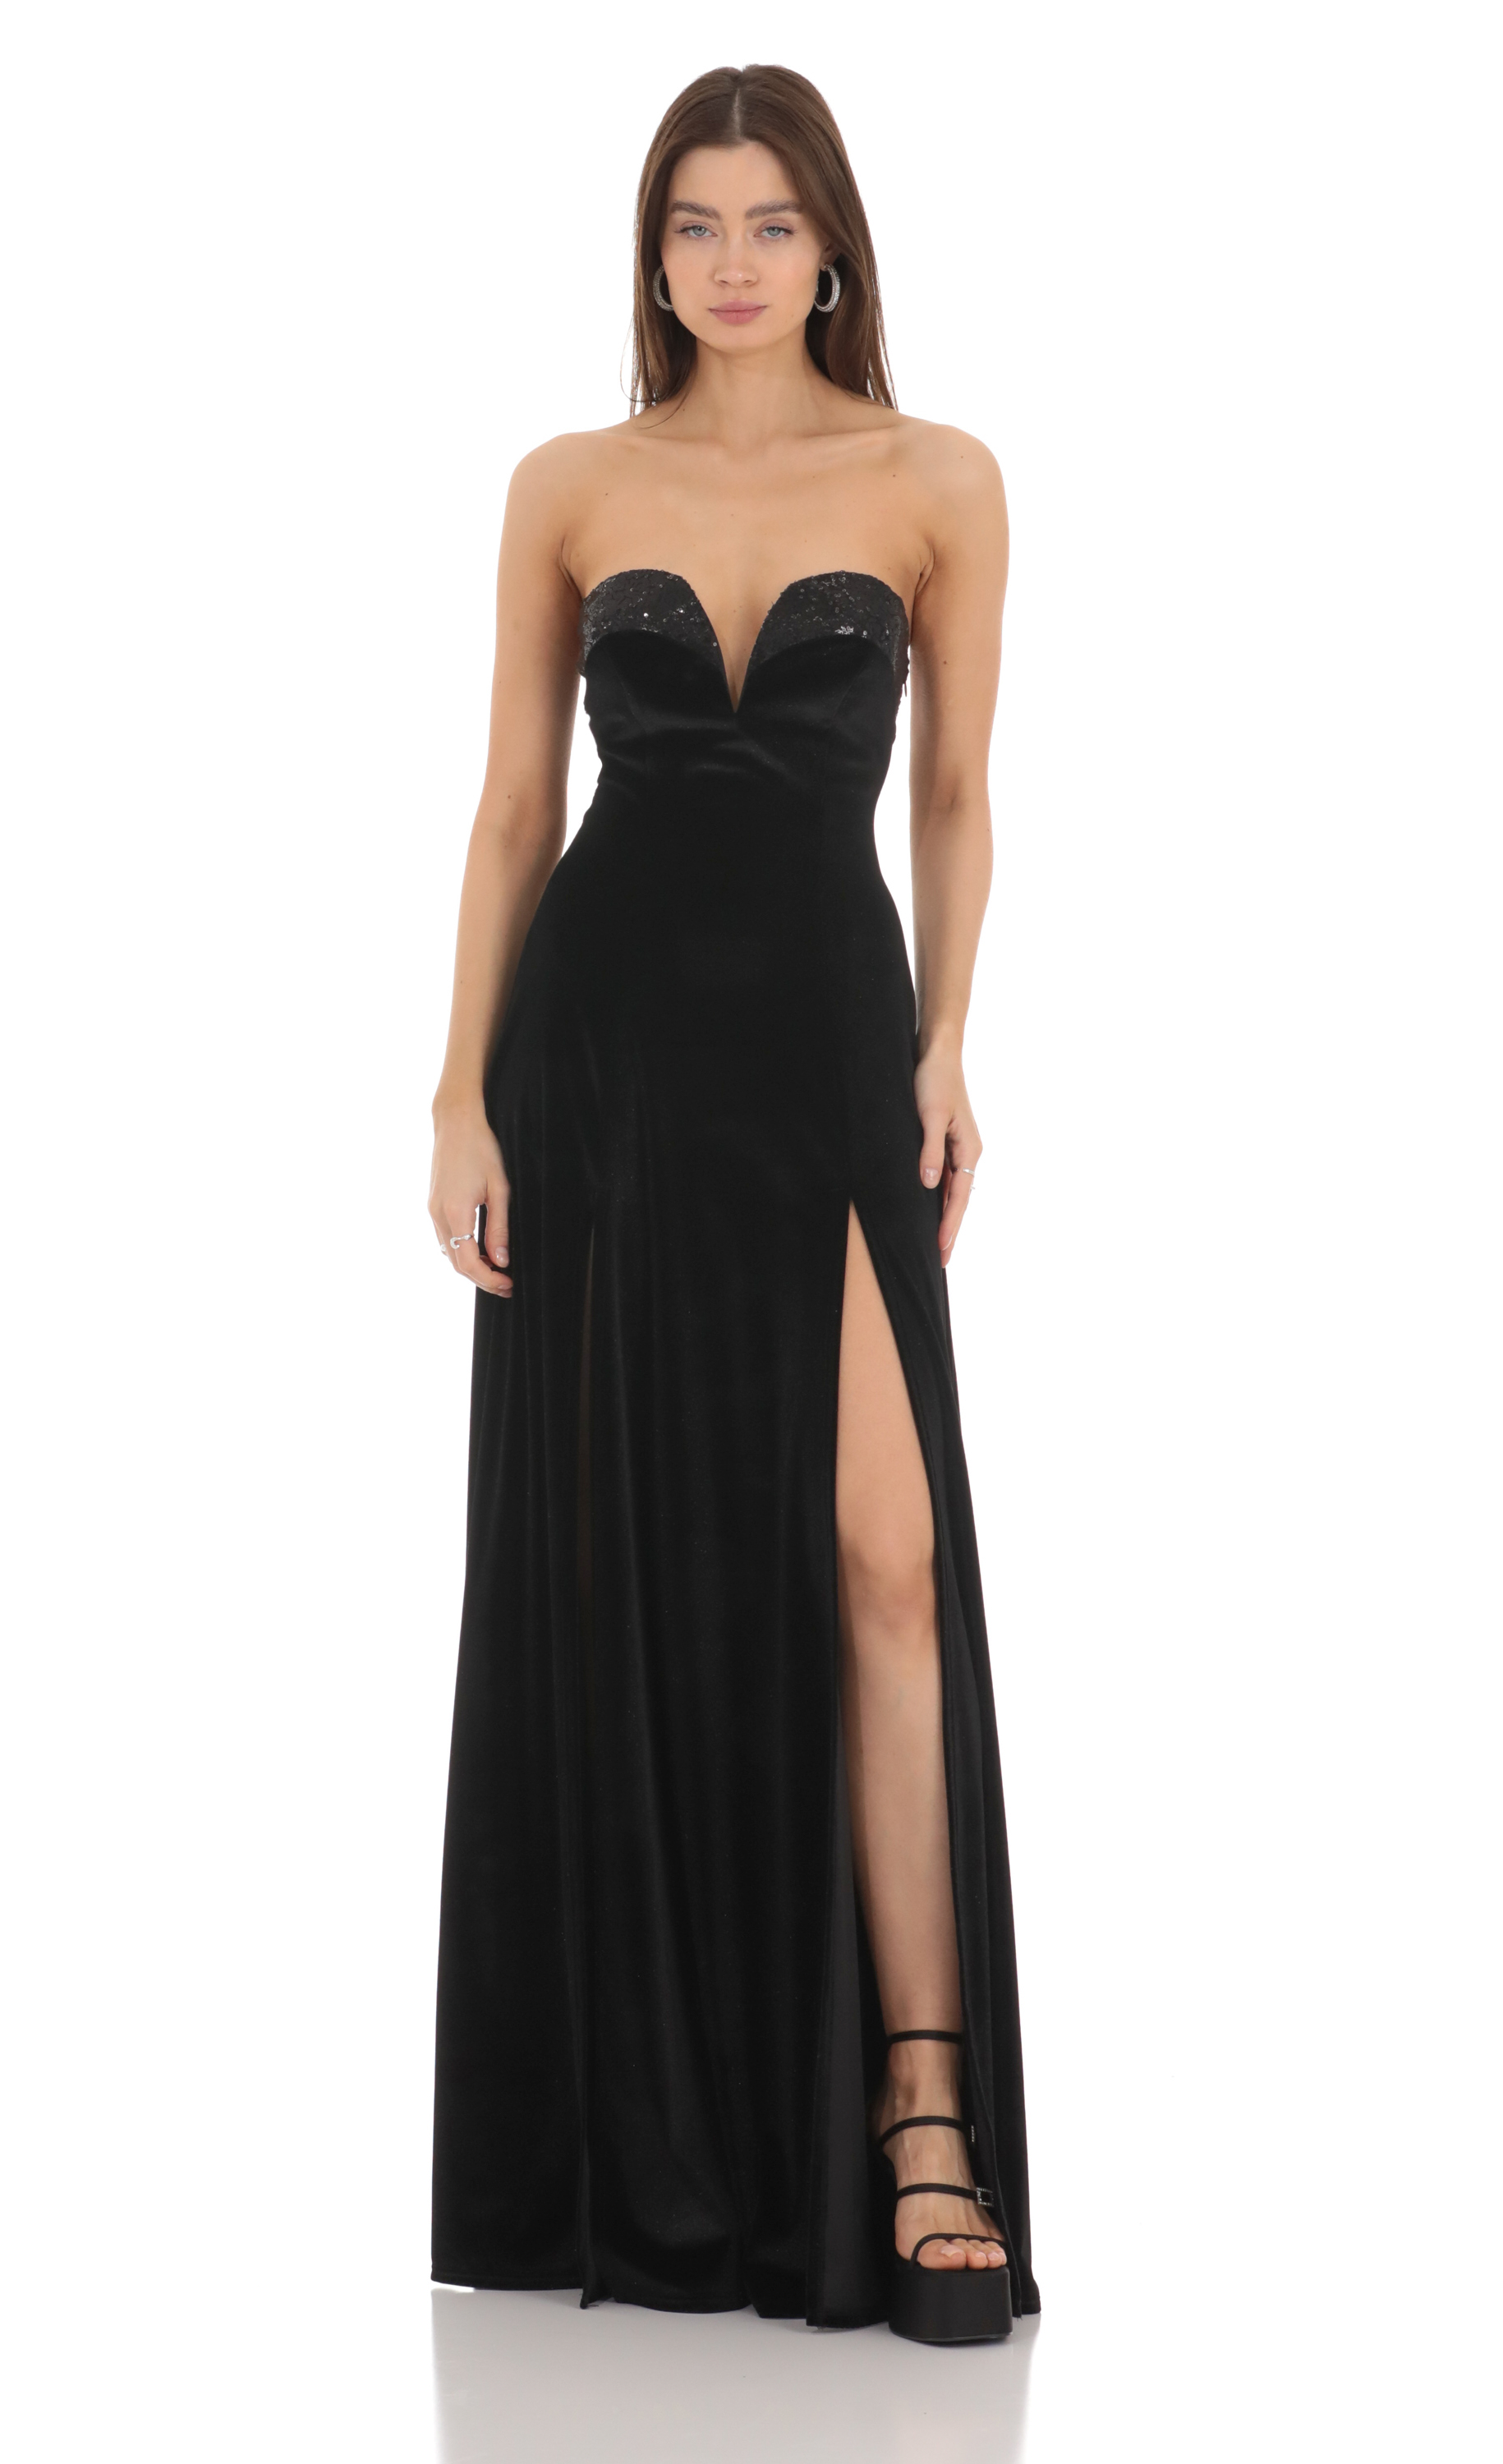 Brinly Strapless Corset Maxi Dress in Black